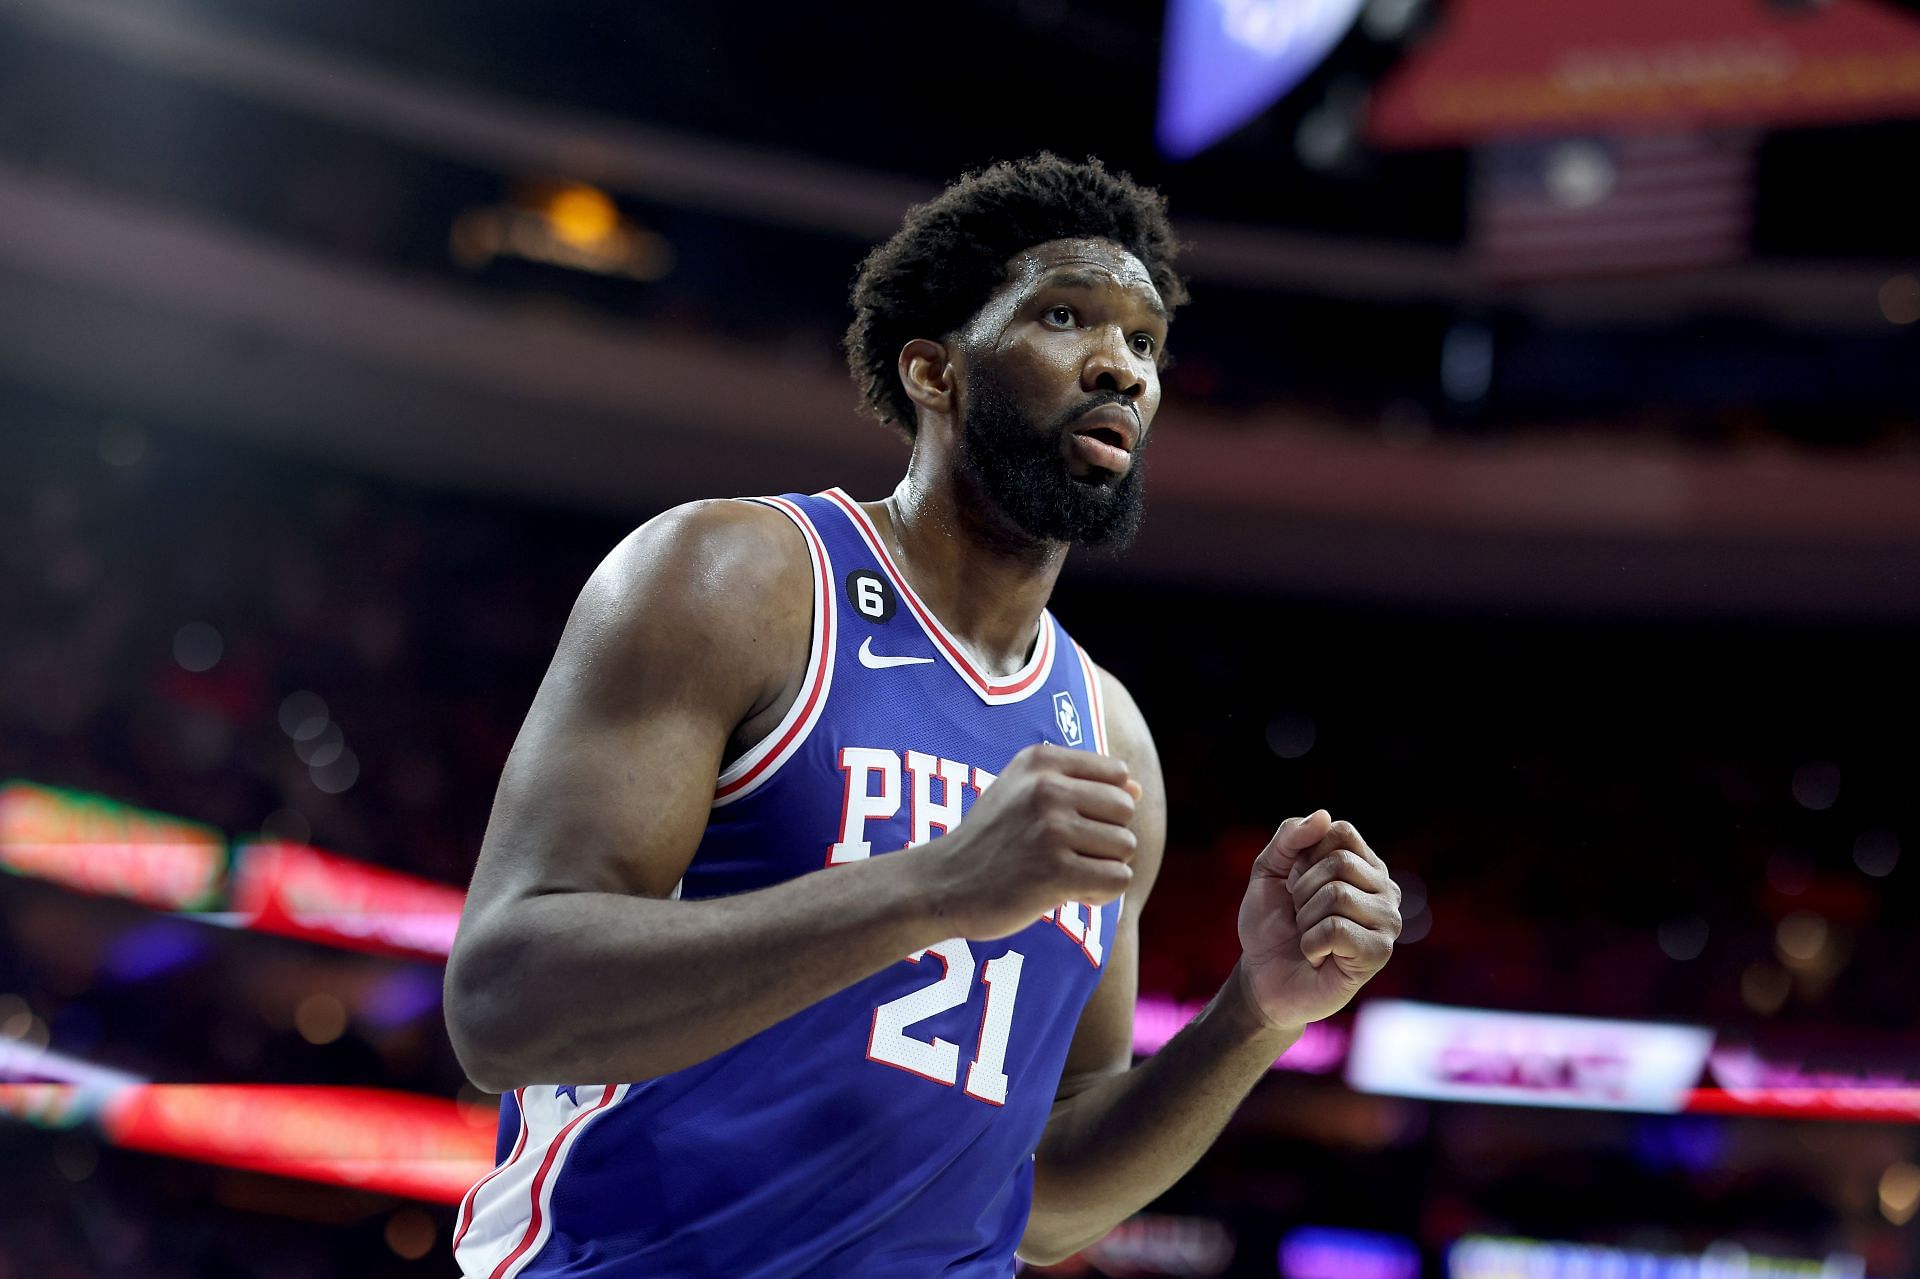 Embiid will be a big part of the upcoming Celtics vs 76ers matchup (Image via Getty Images)